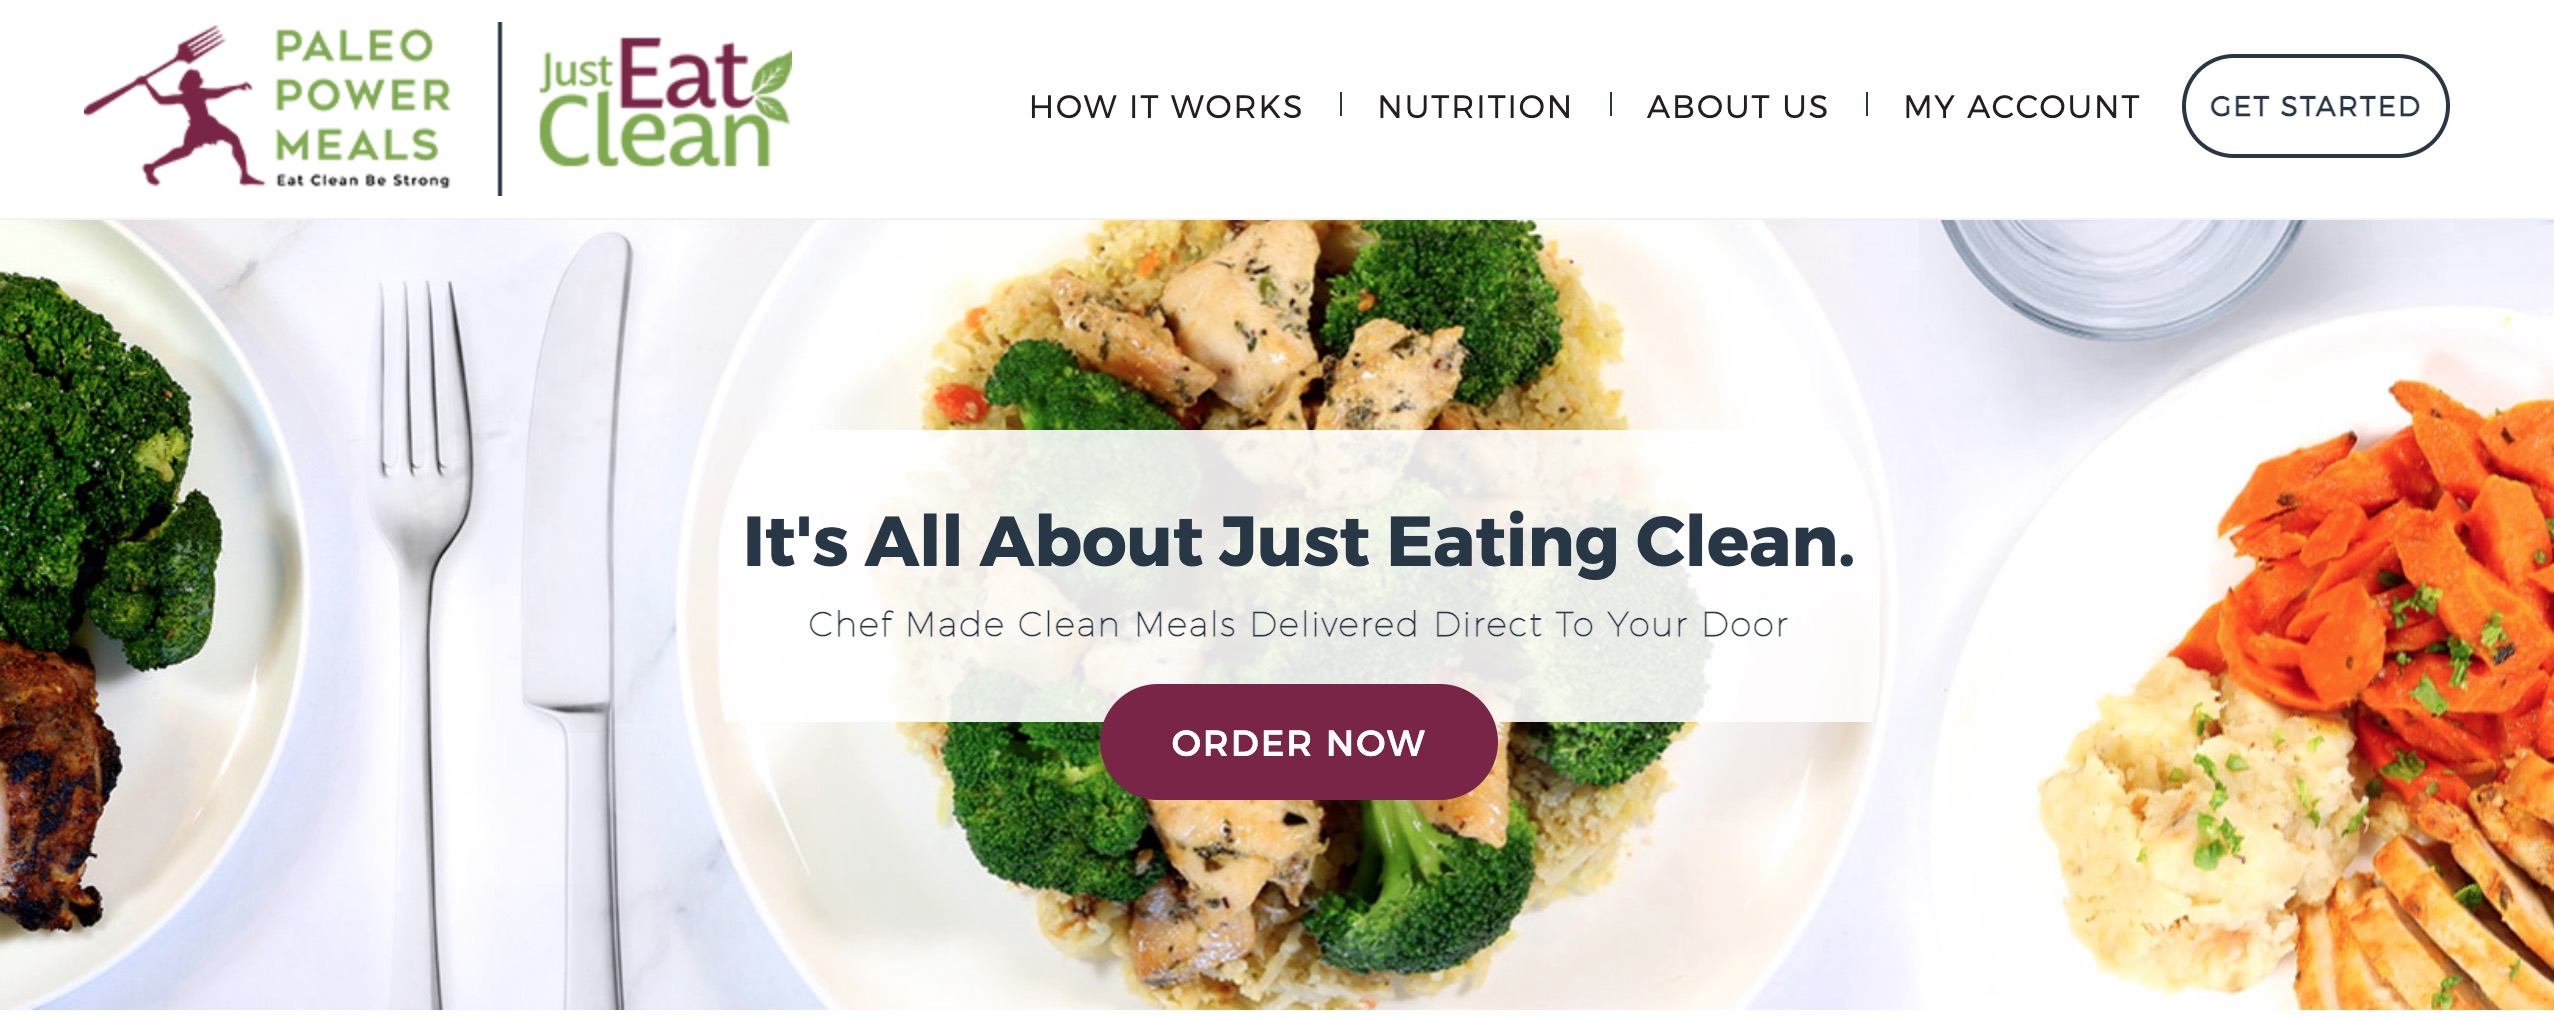 Paleo Power Meals main page